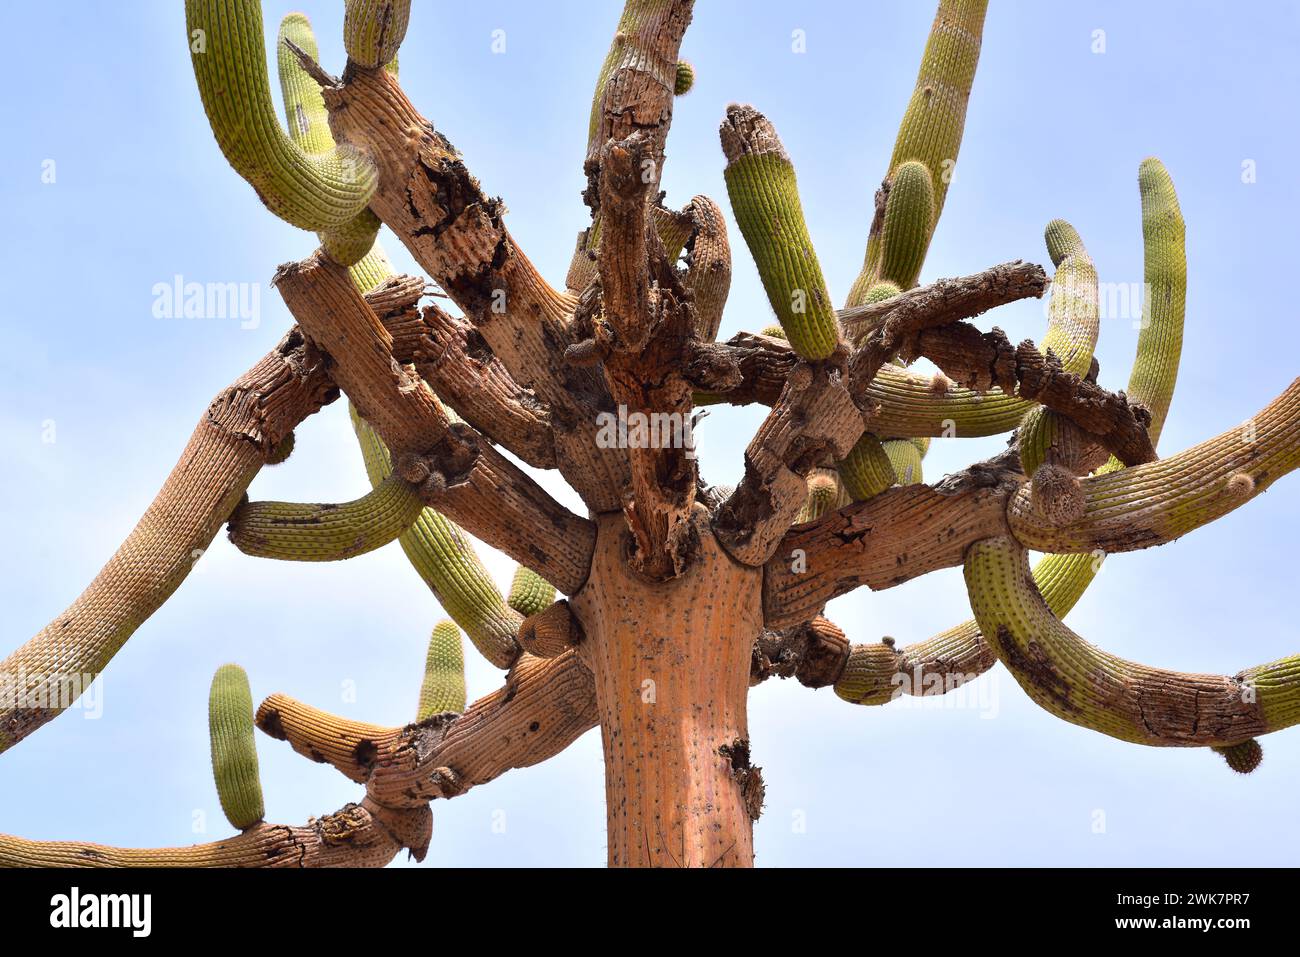 Candleholder cactus or cactus candelabro (Browningia candelaris) is an arborescent cactus endemic to northern Chile and southern Peru. Branches detail Stock Photo